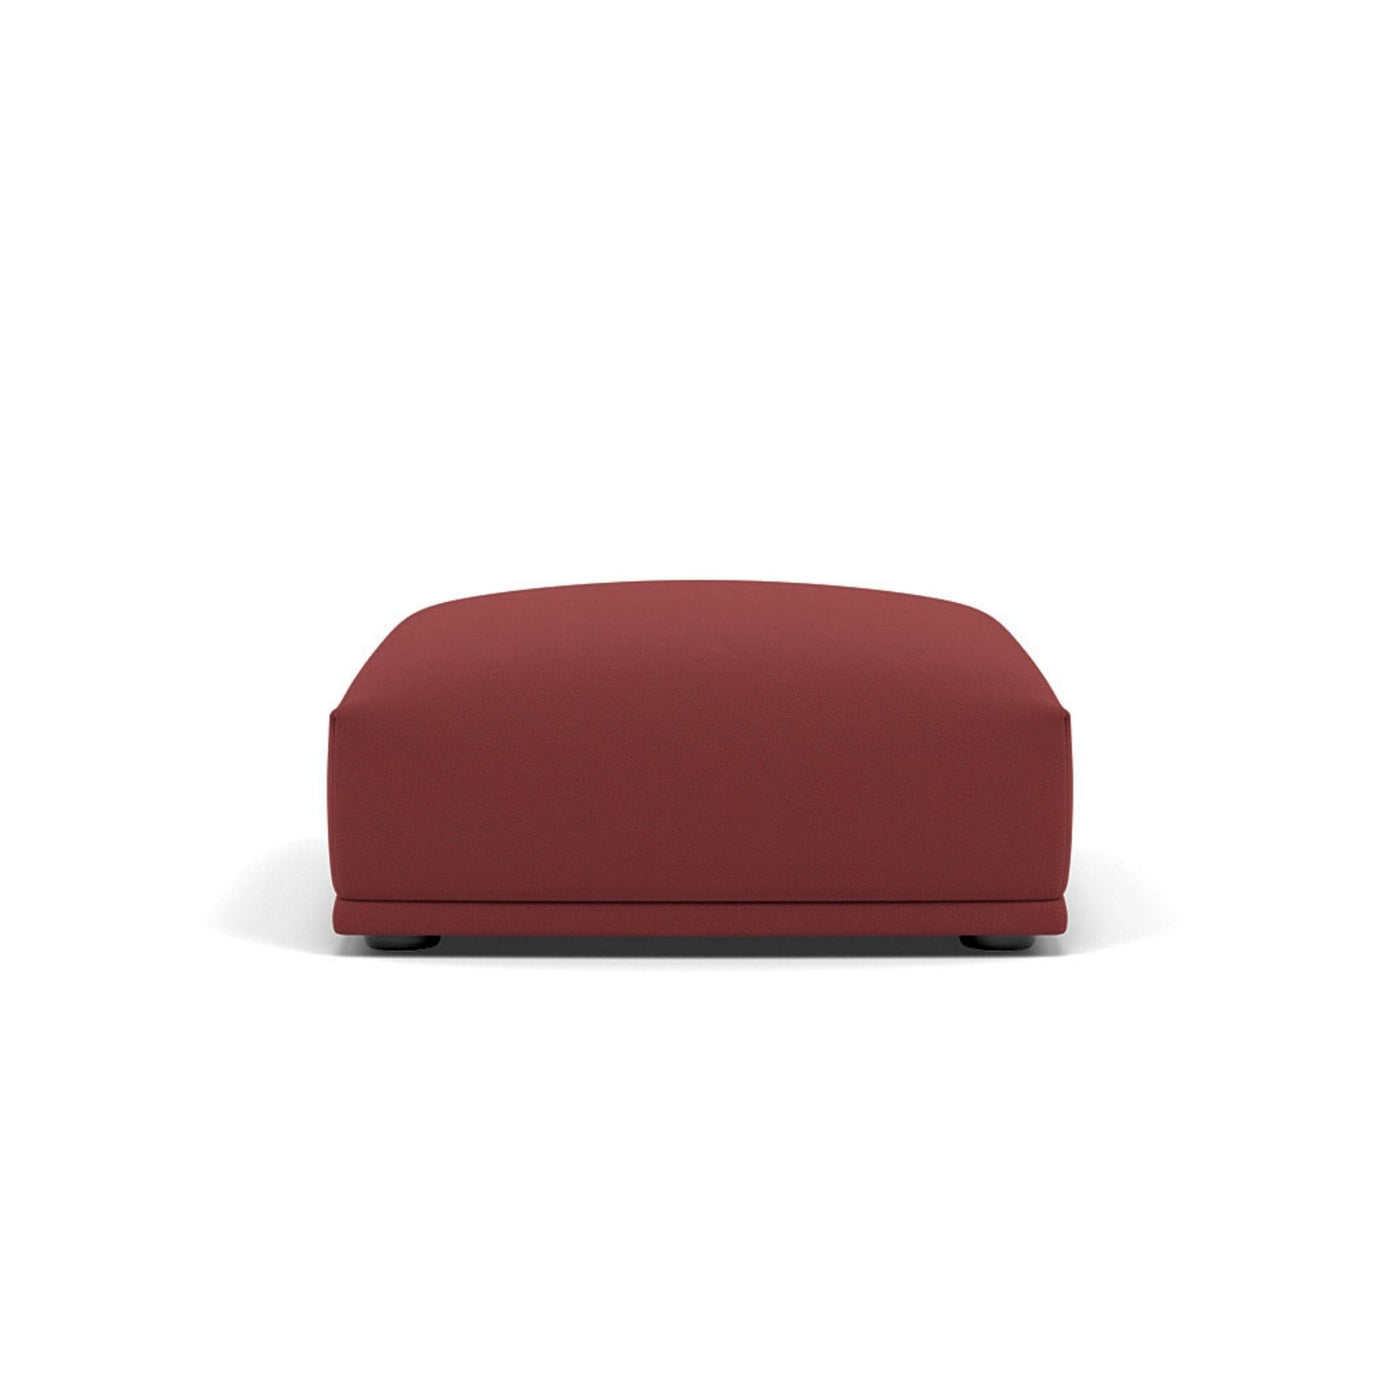 Muuto Connect Modular Sofa System, module i, short ottoman, rime 591 red fabric. Available from someday designs. #colour_rime-591